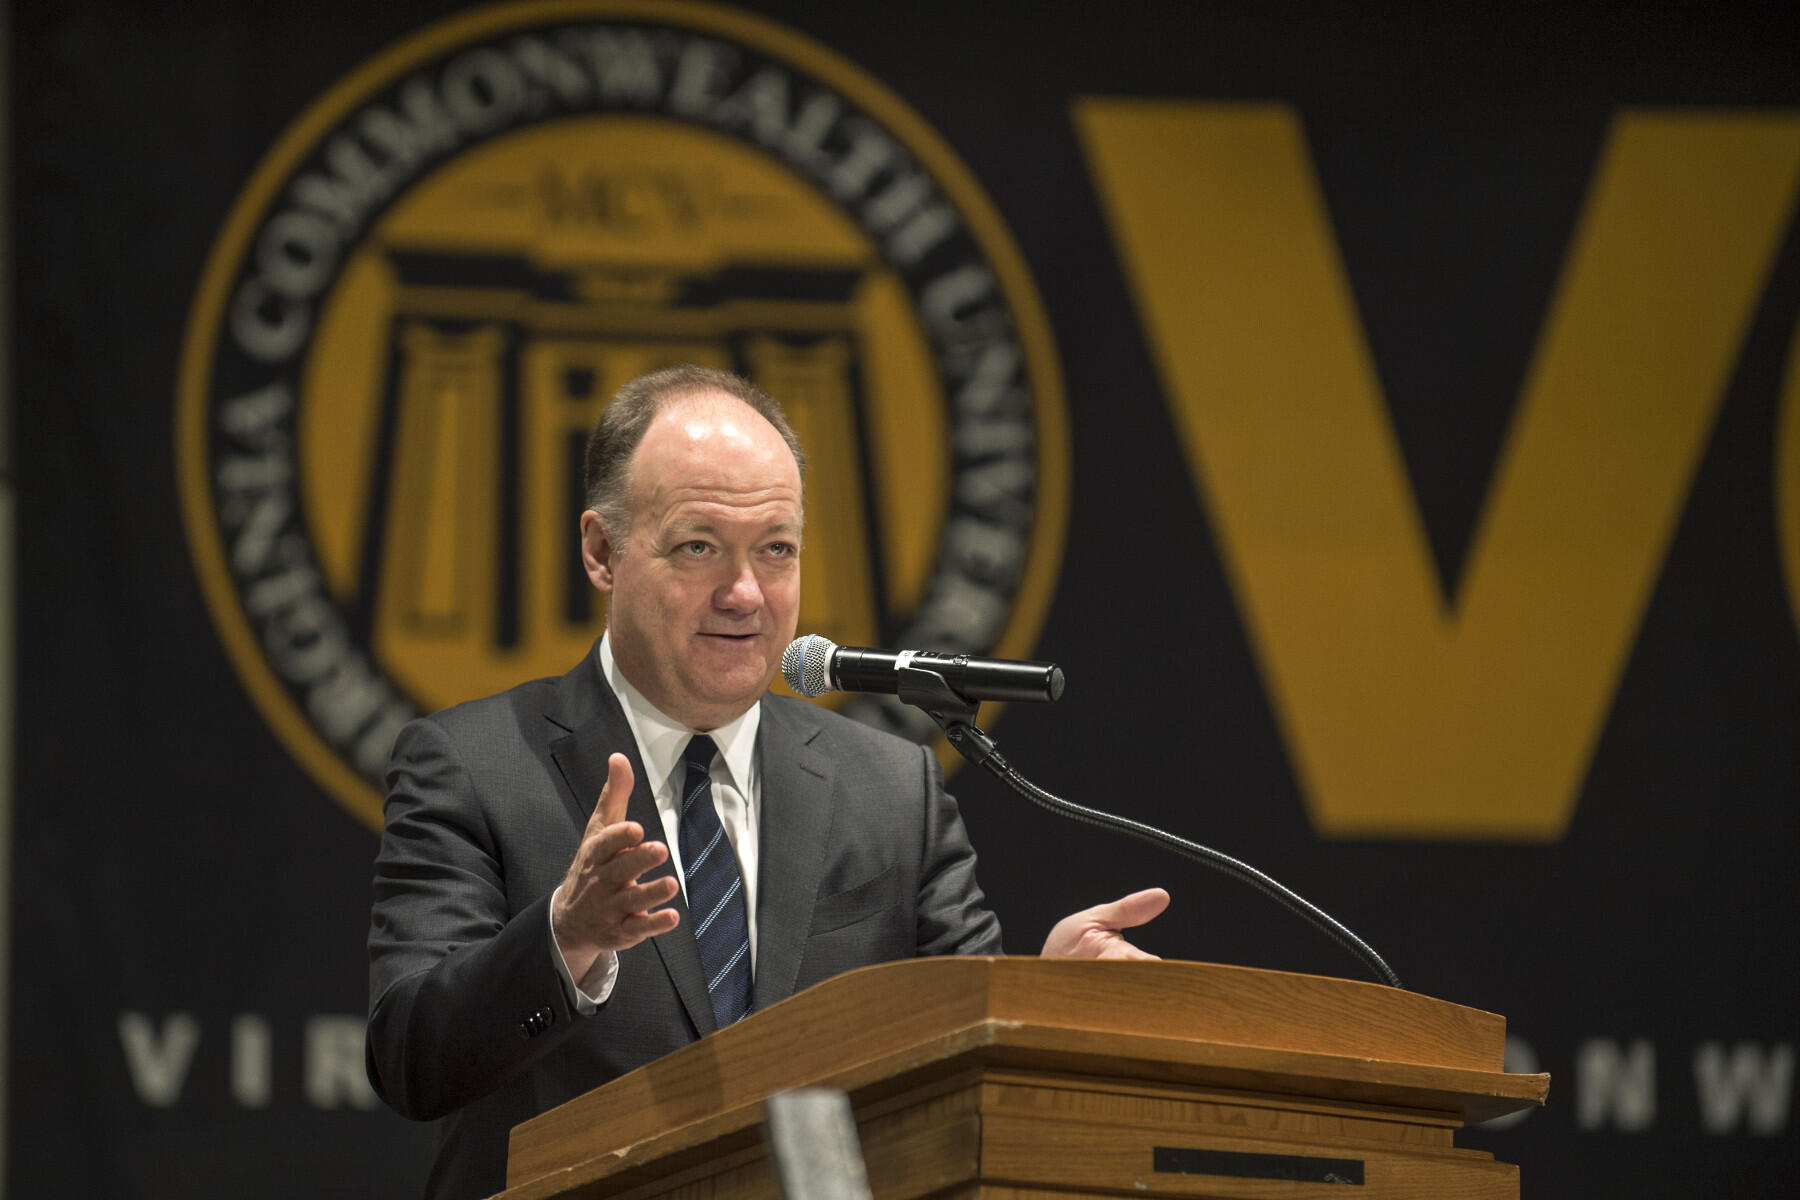 John DeGioia, Ph.D., president of Georgetown University, told VCU faculty members that "we do best when we listen to members of our community" on issues such as freedom of speech and academic freedom. (Photo by Kevin Morley, University Marketing)